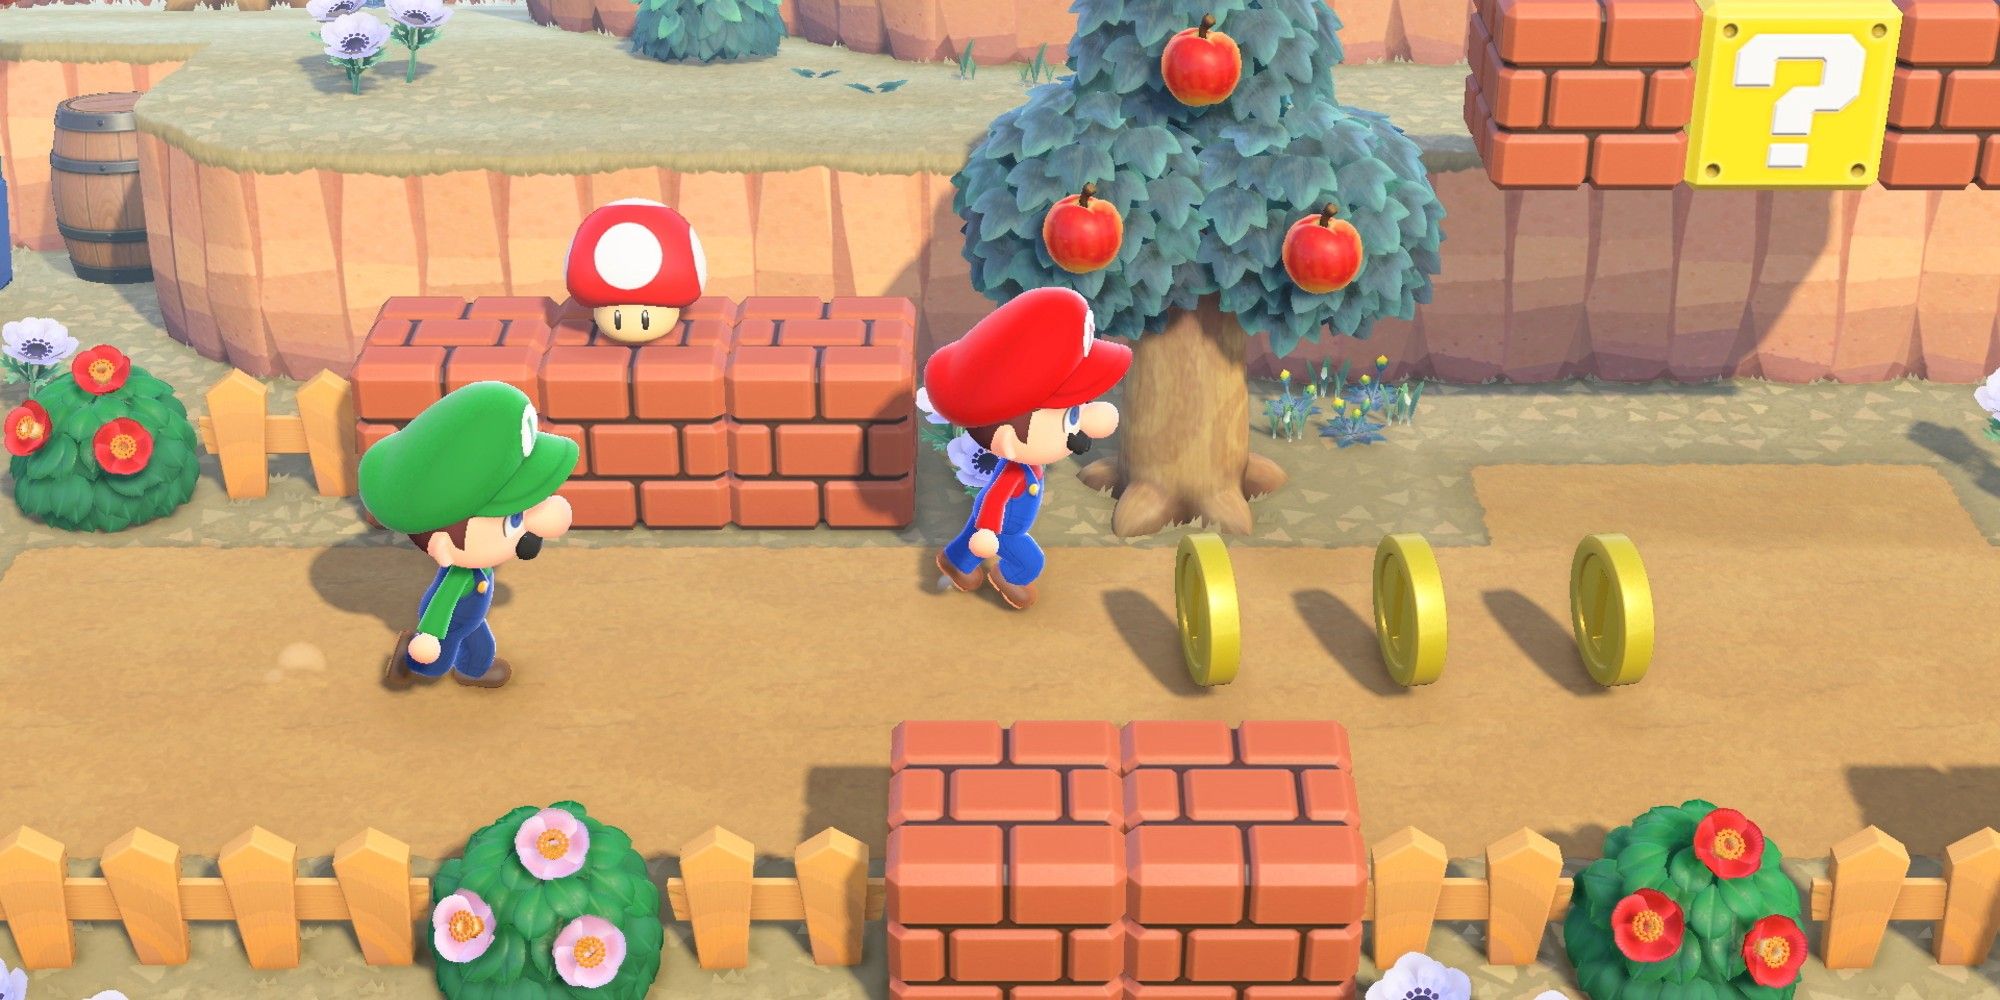 Players dressed as Mario and Luigi run through a row of Super Mario Bros Coin decoration items in Animal Crossing: New Horizons